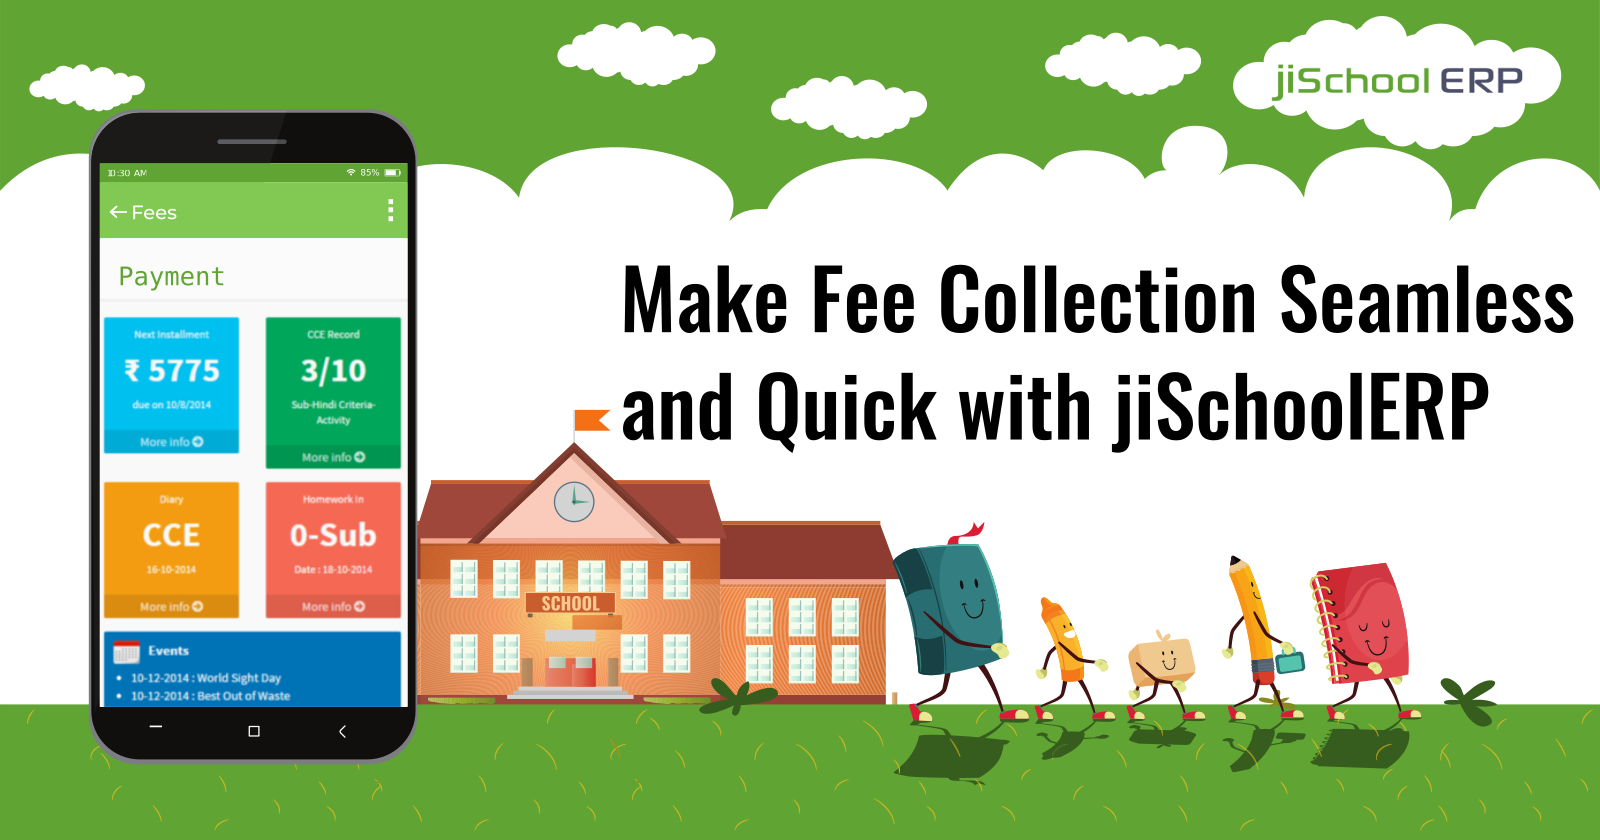 Make Fee Collection Seamless and Quick with jiSchoolERP